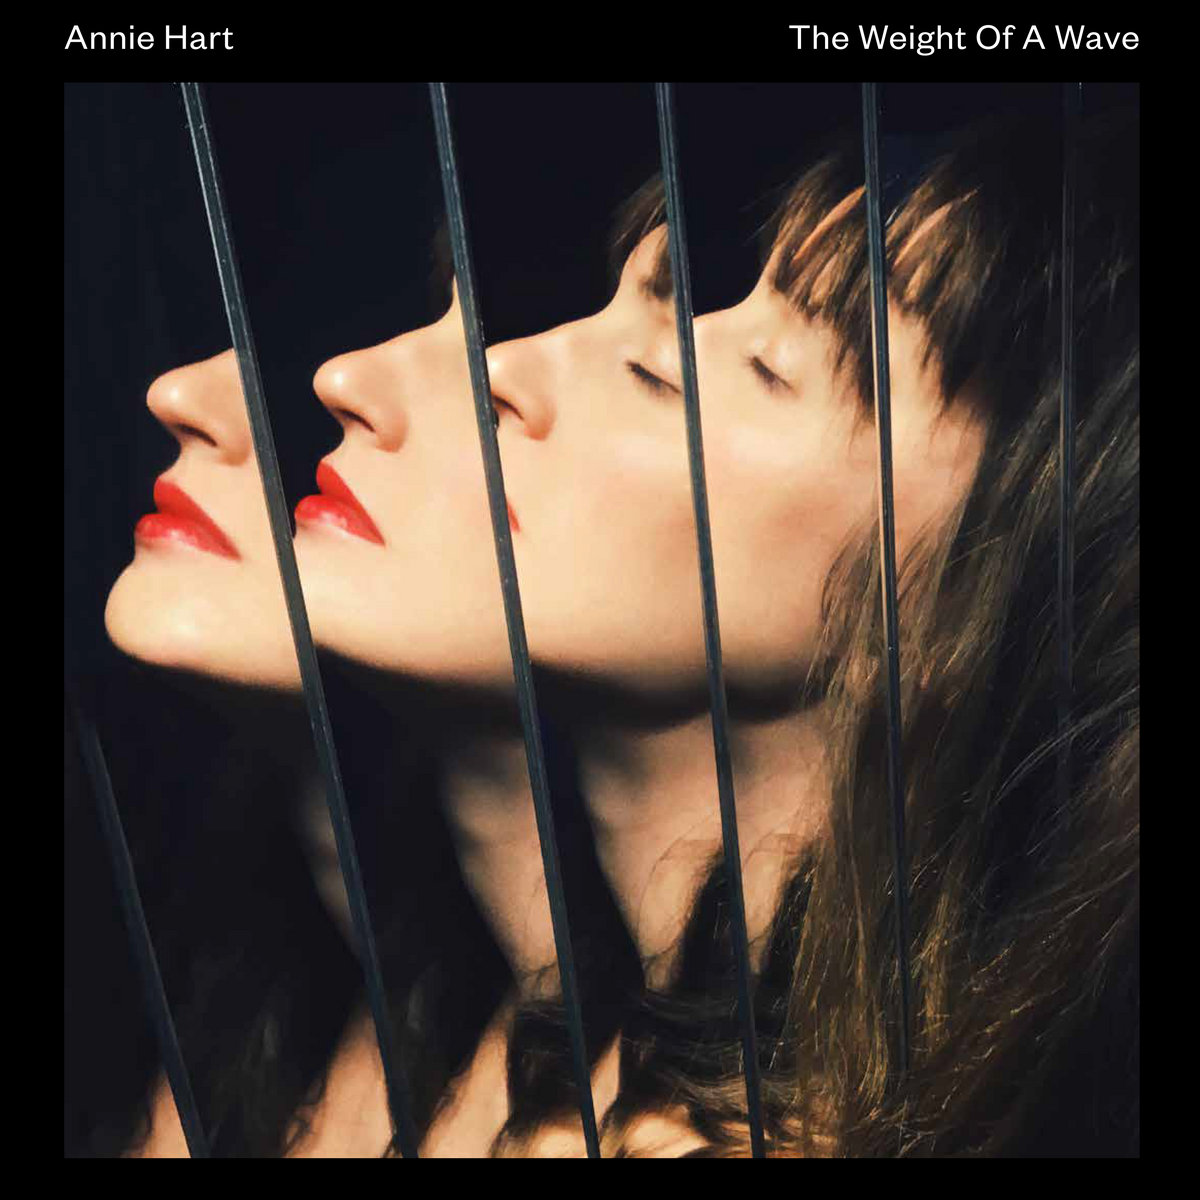 Listen Up – Annie Hart – The Weight of A Wave